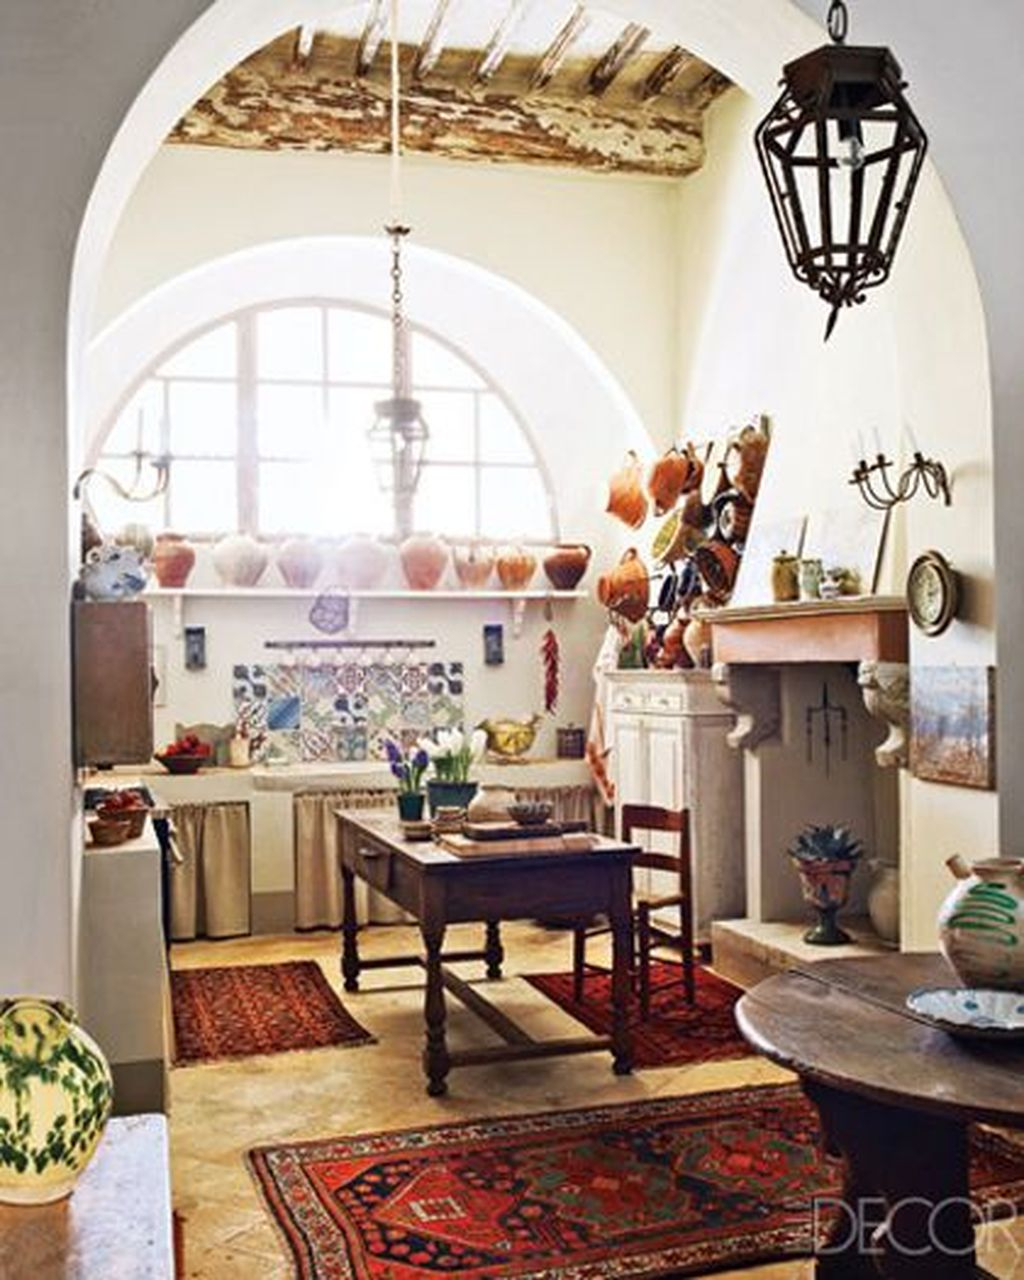 Awesome Bohemian Kitchen Design Ideas For Comfortable Cooking16